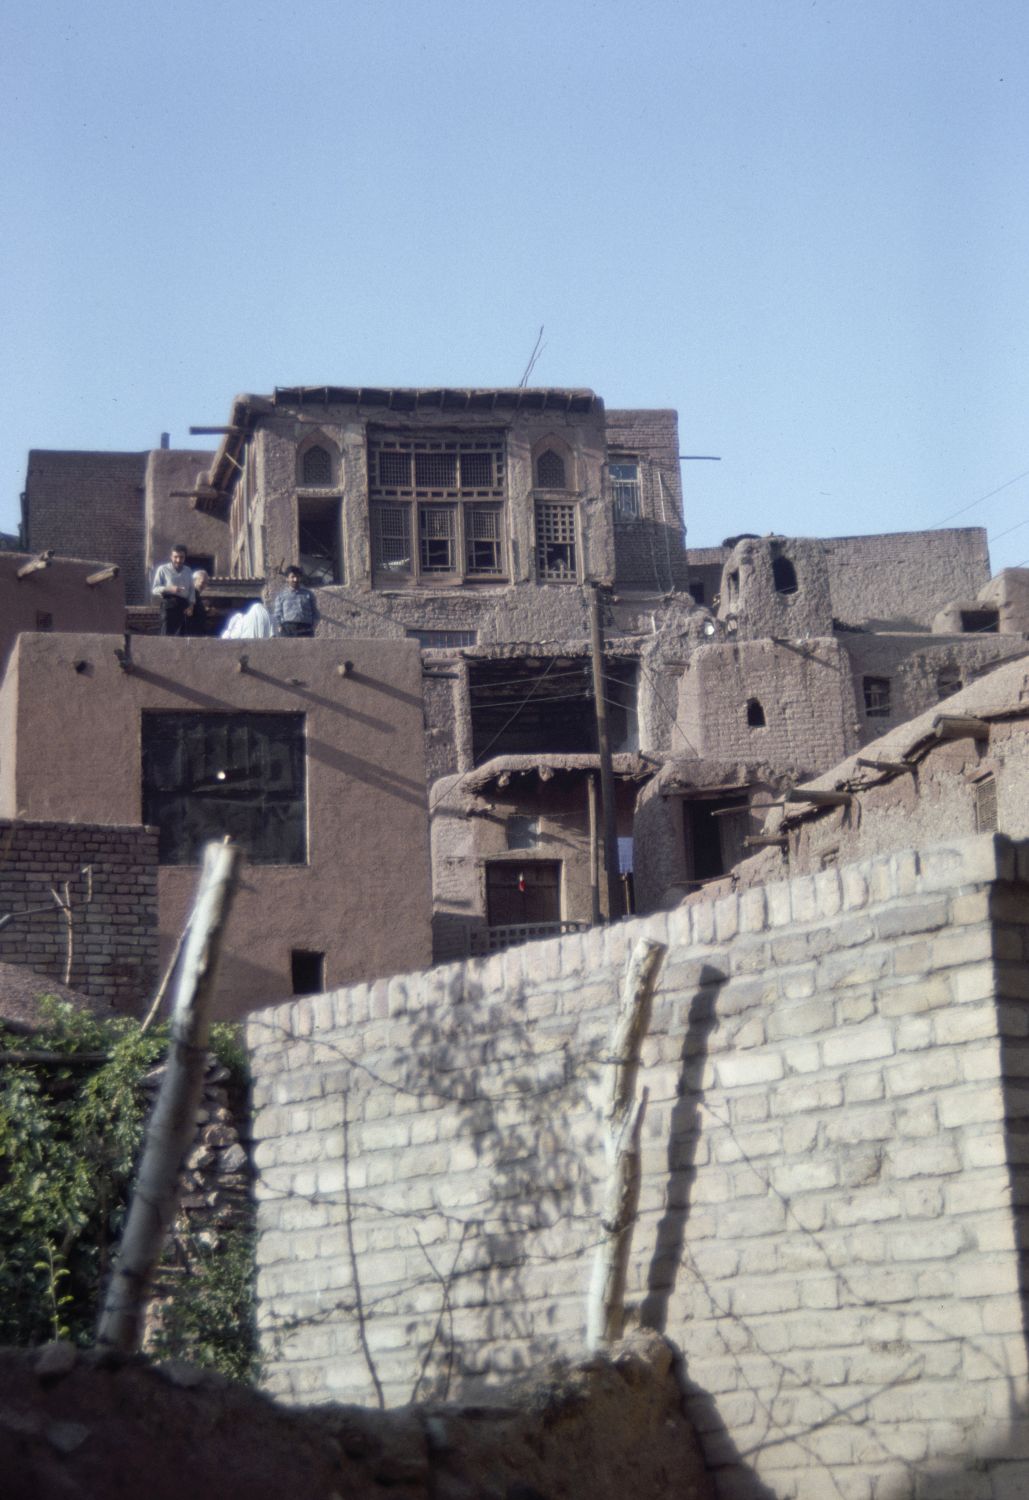 View of houses in the village of Abyanah, Iran.